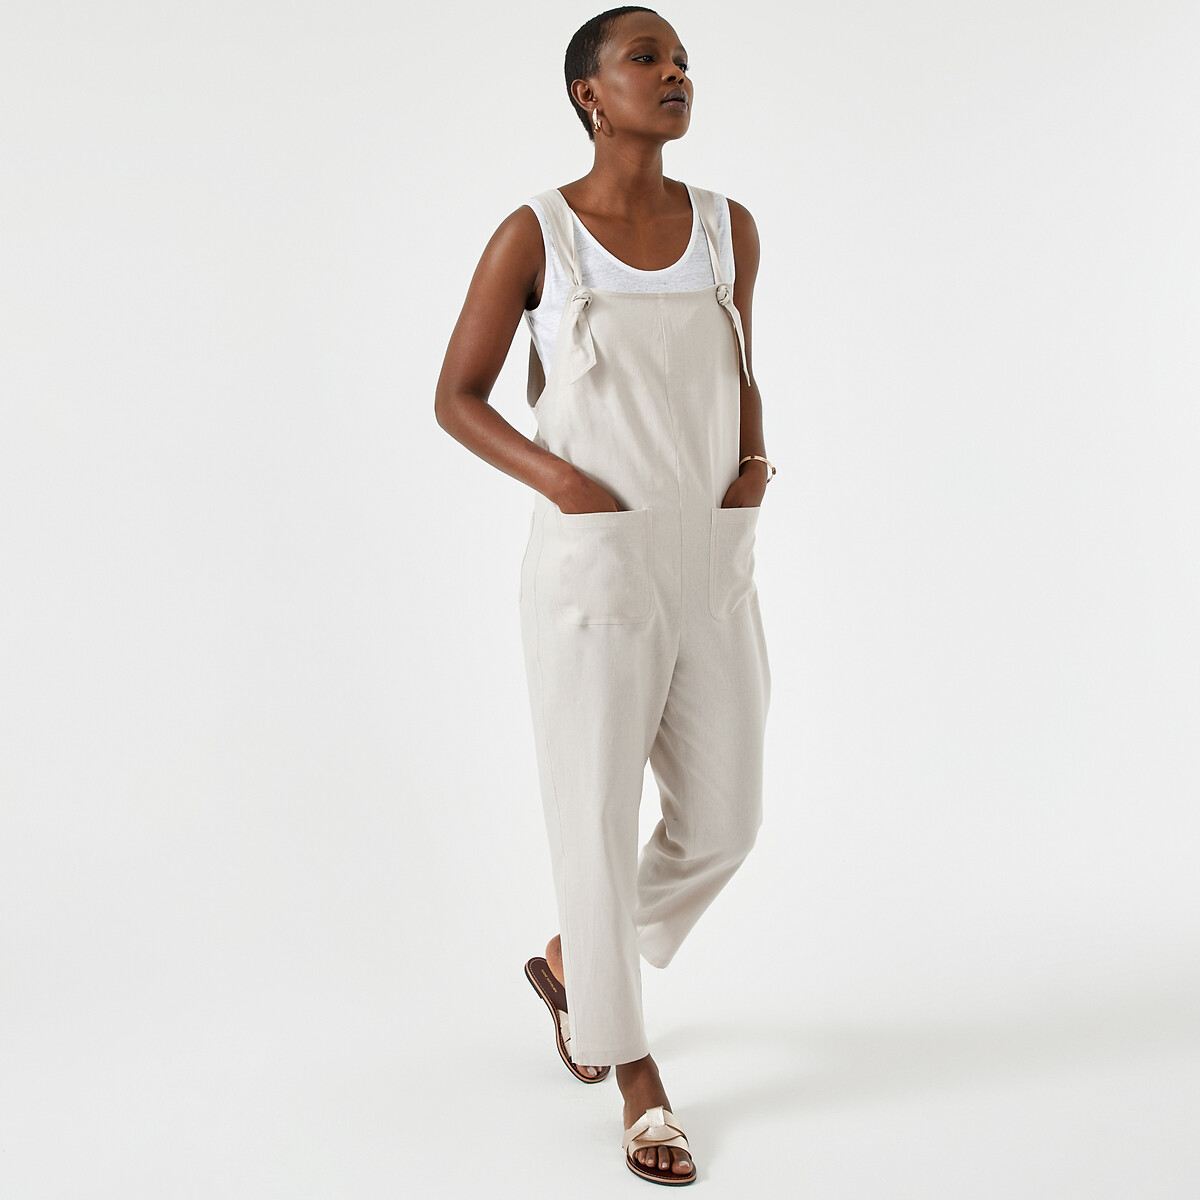 Image of Linen Dungarees, Length 25"